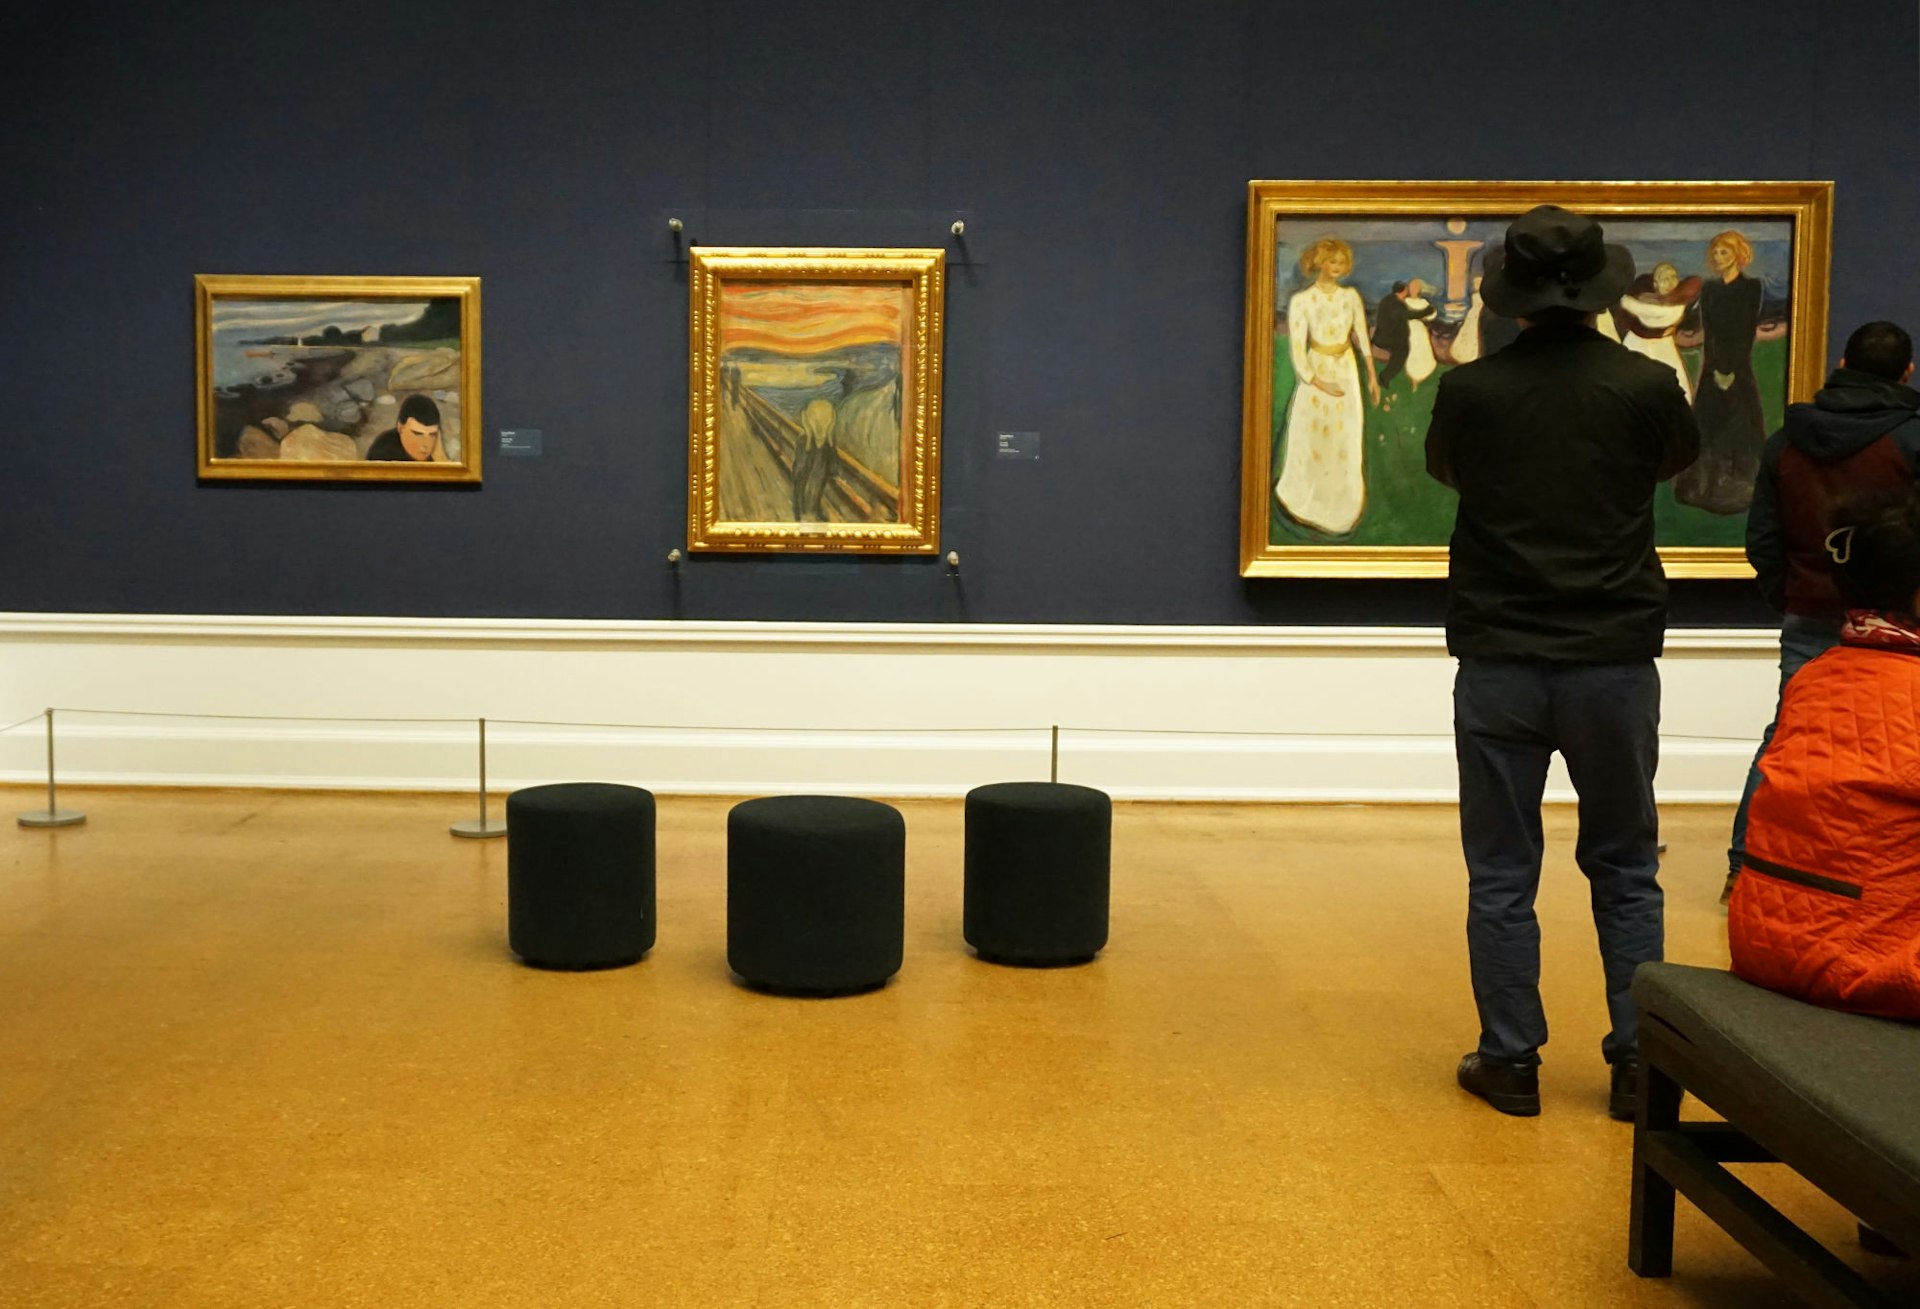 Features - The-Munch-room-at-the-National-Gallery-VO04007_1-c325aef75d80